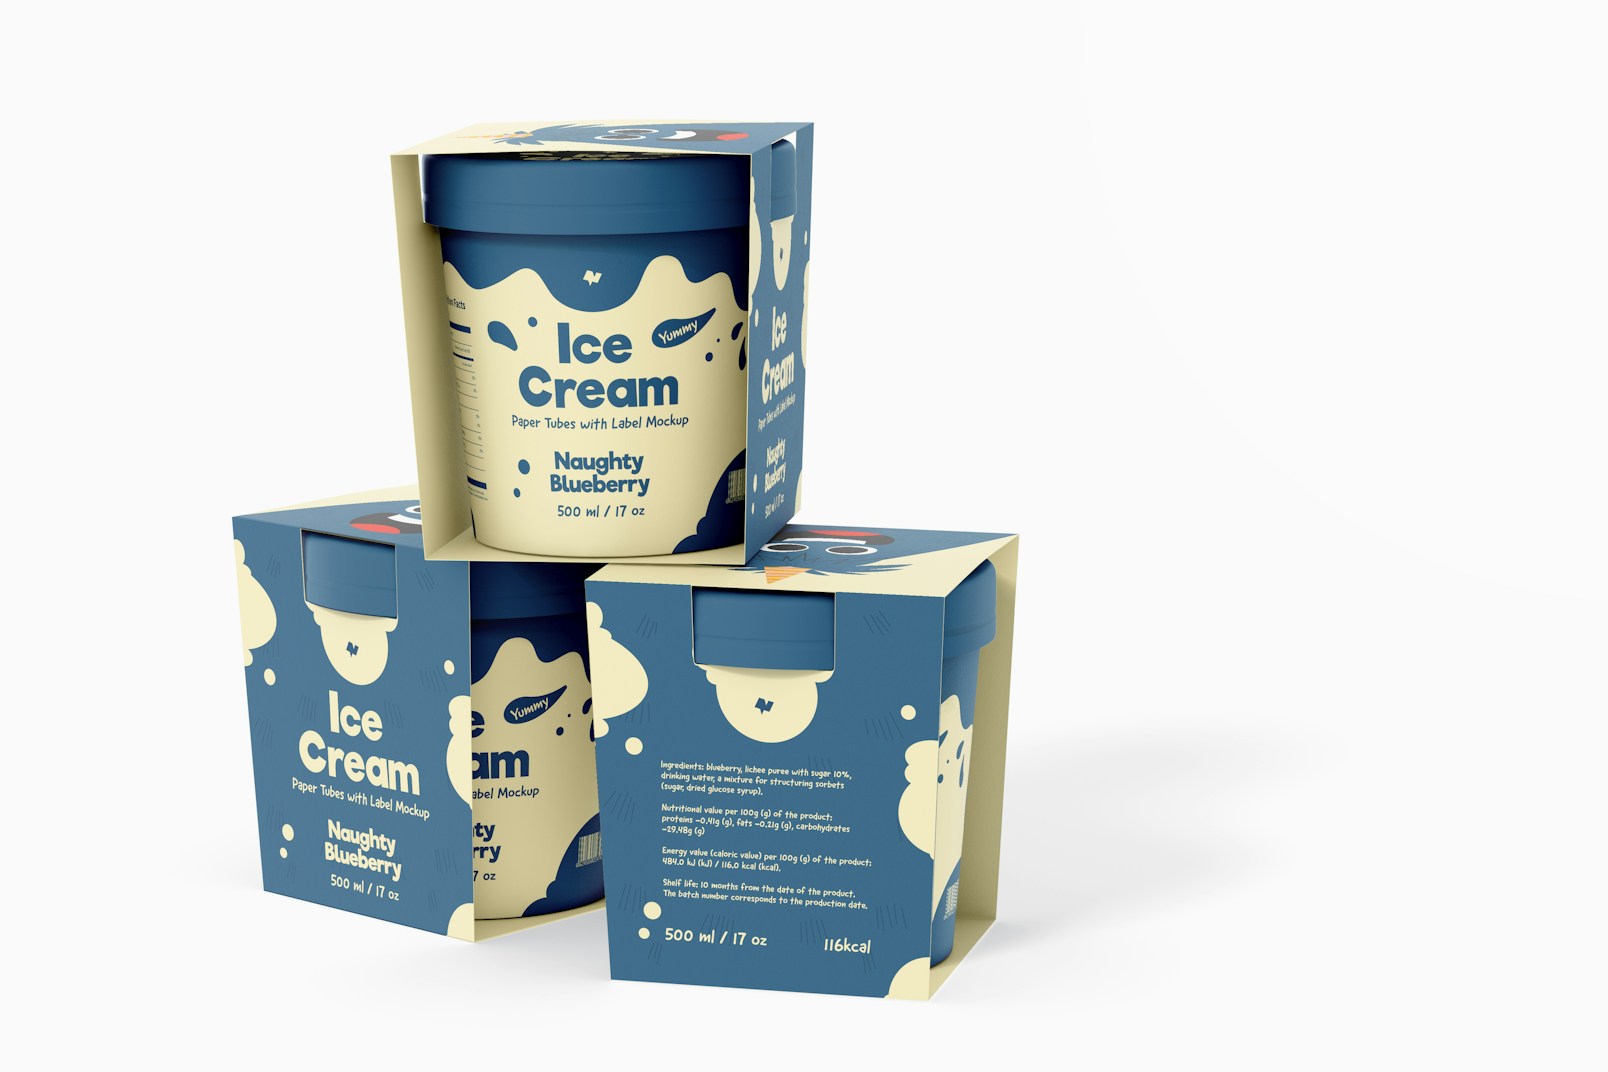 500 ml Ice Cream Paper Tub with Label Mockup, Stacked